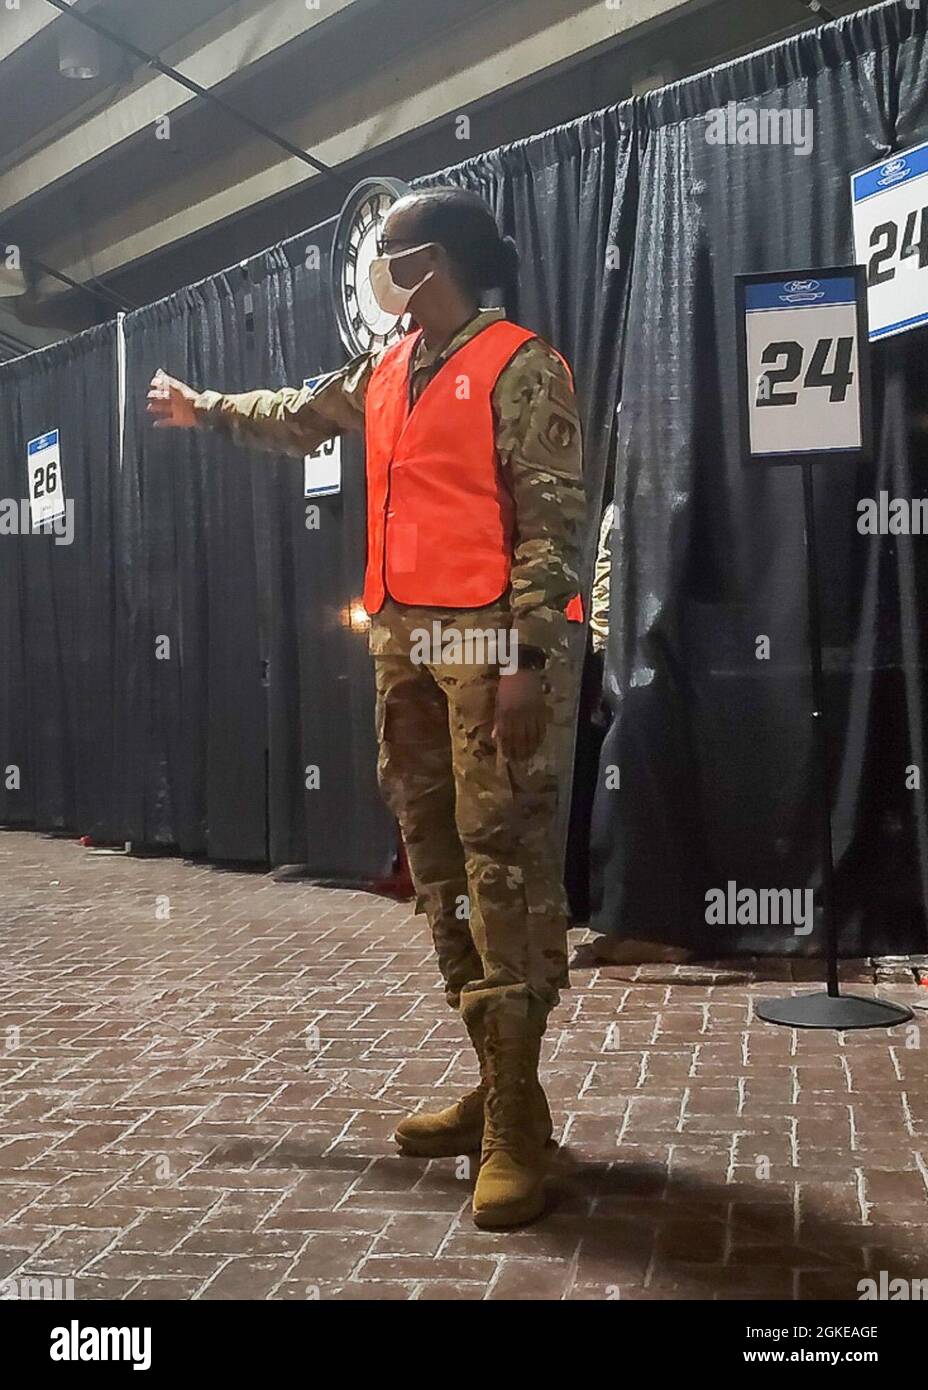 Kodak Black Outfit from July 26, 2021